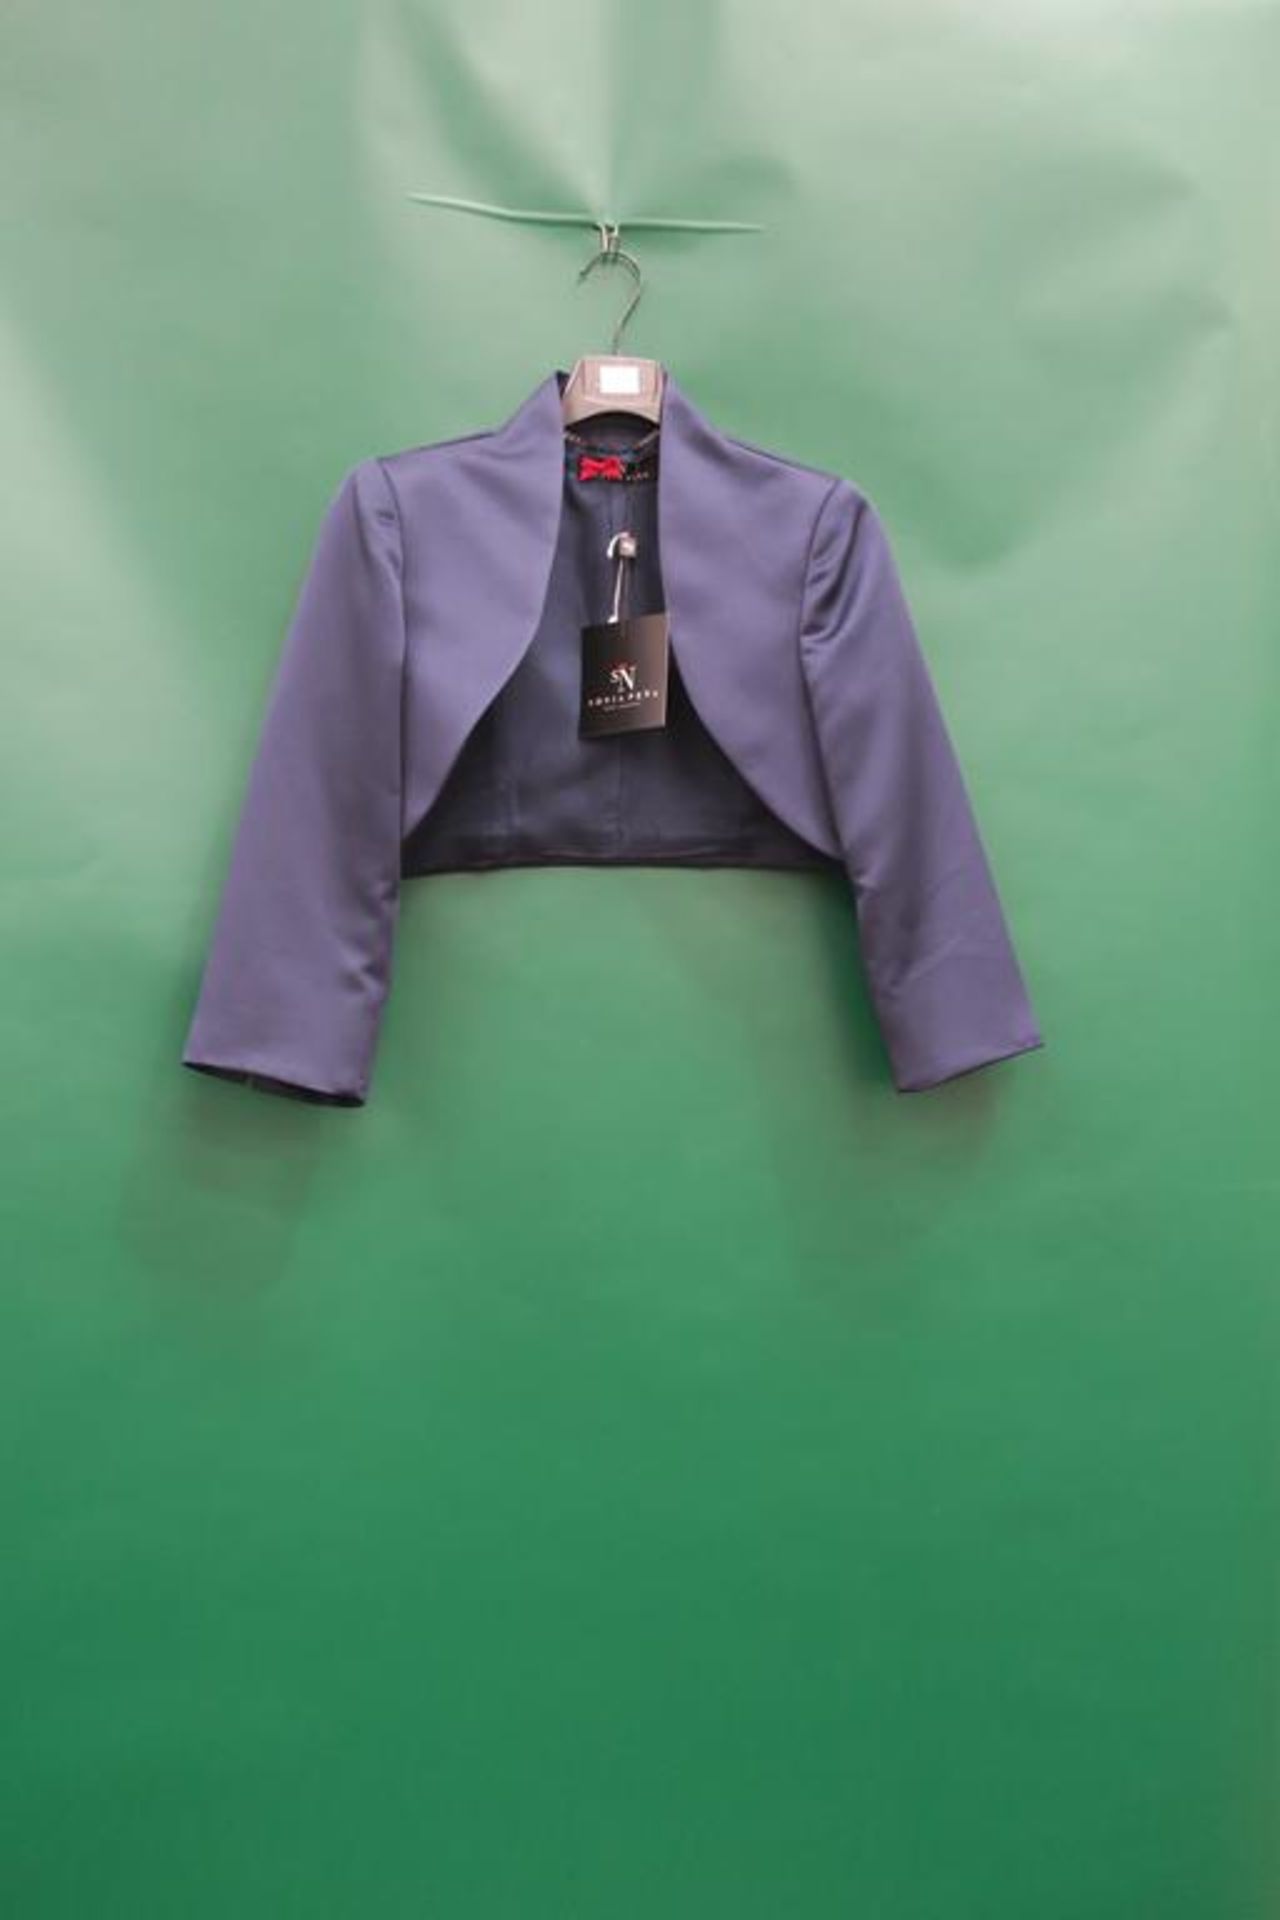 * Three items of Ladies Formal Wear to include: a Sonia Peña Jacket labelled as size 10, a D'zage